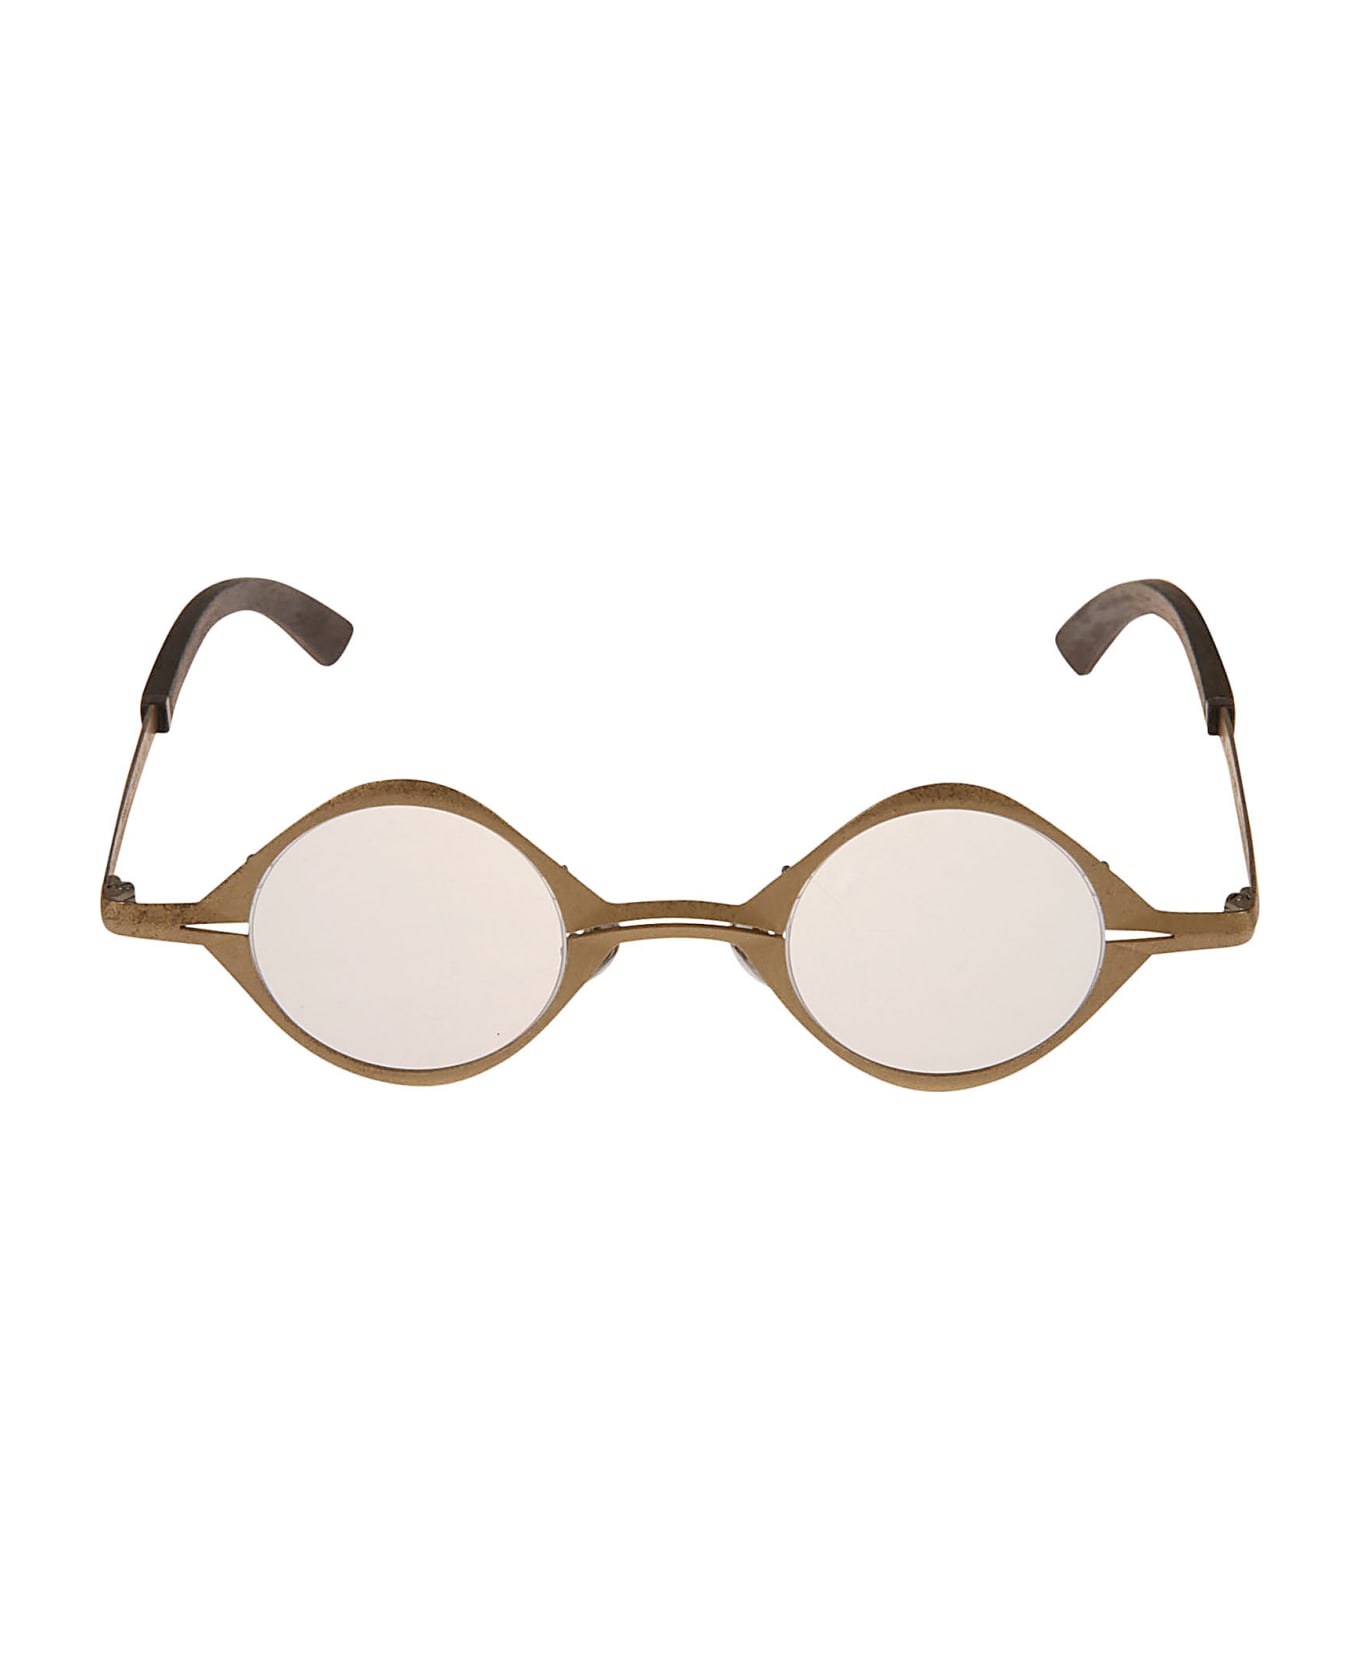 RIGARDS Leather Detail Round Glasses - Gold